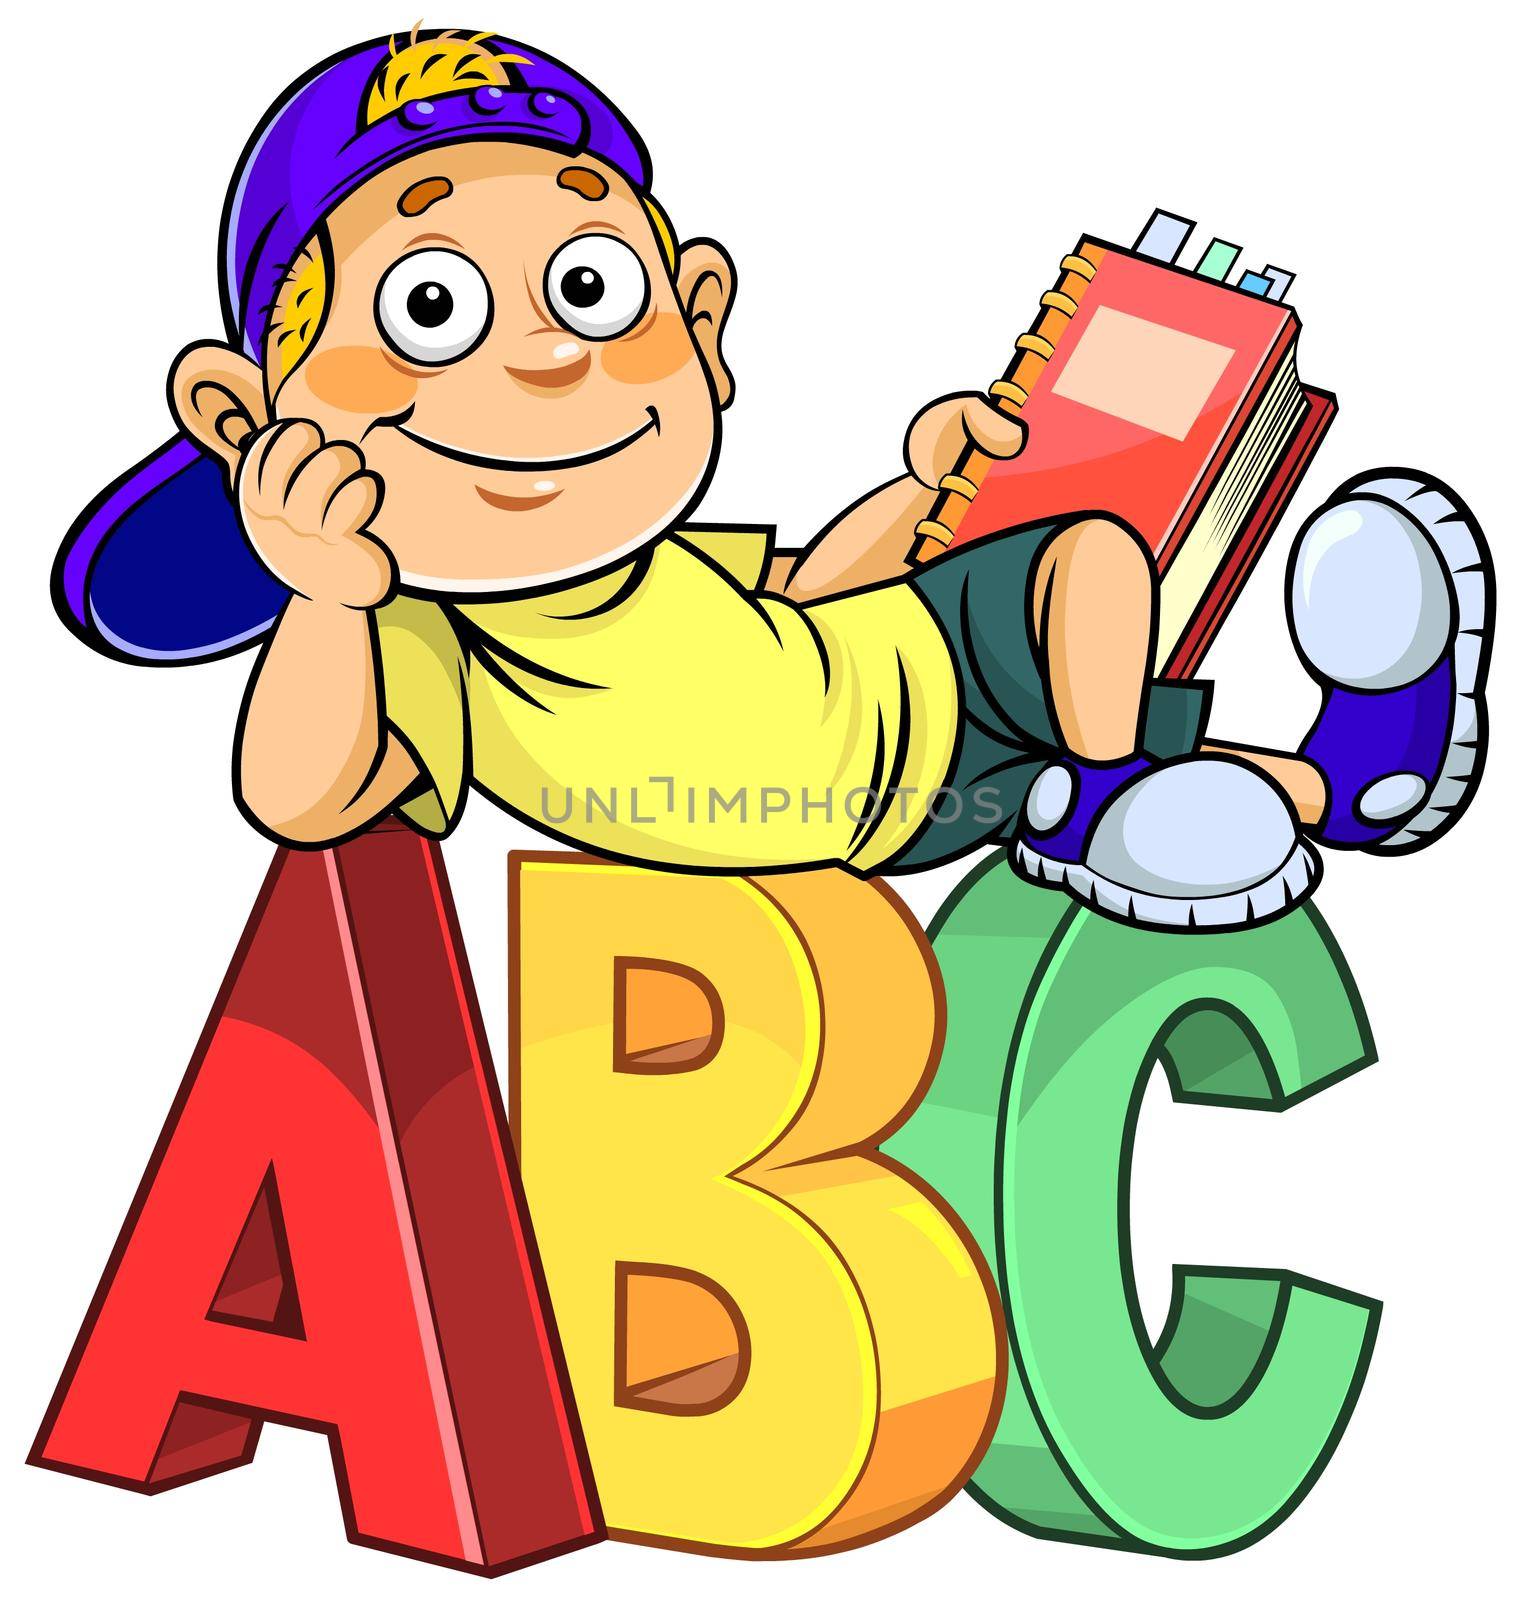 Cartoon schoolboy holding a book and sitting on ABC alphabet letters.